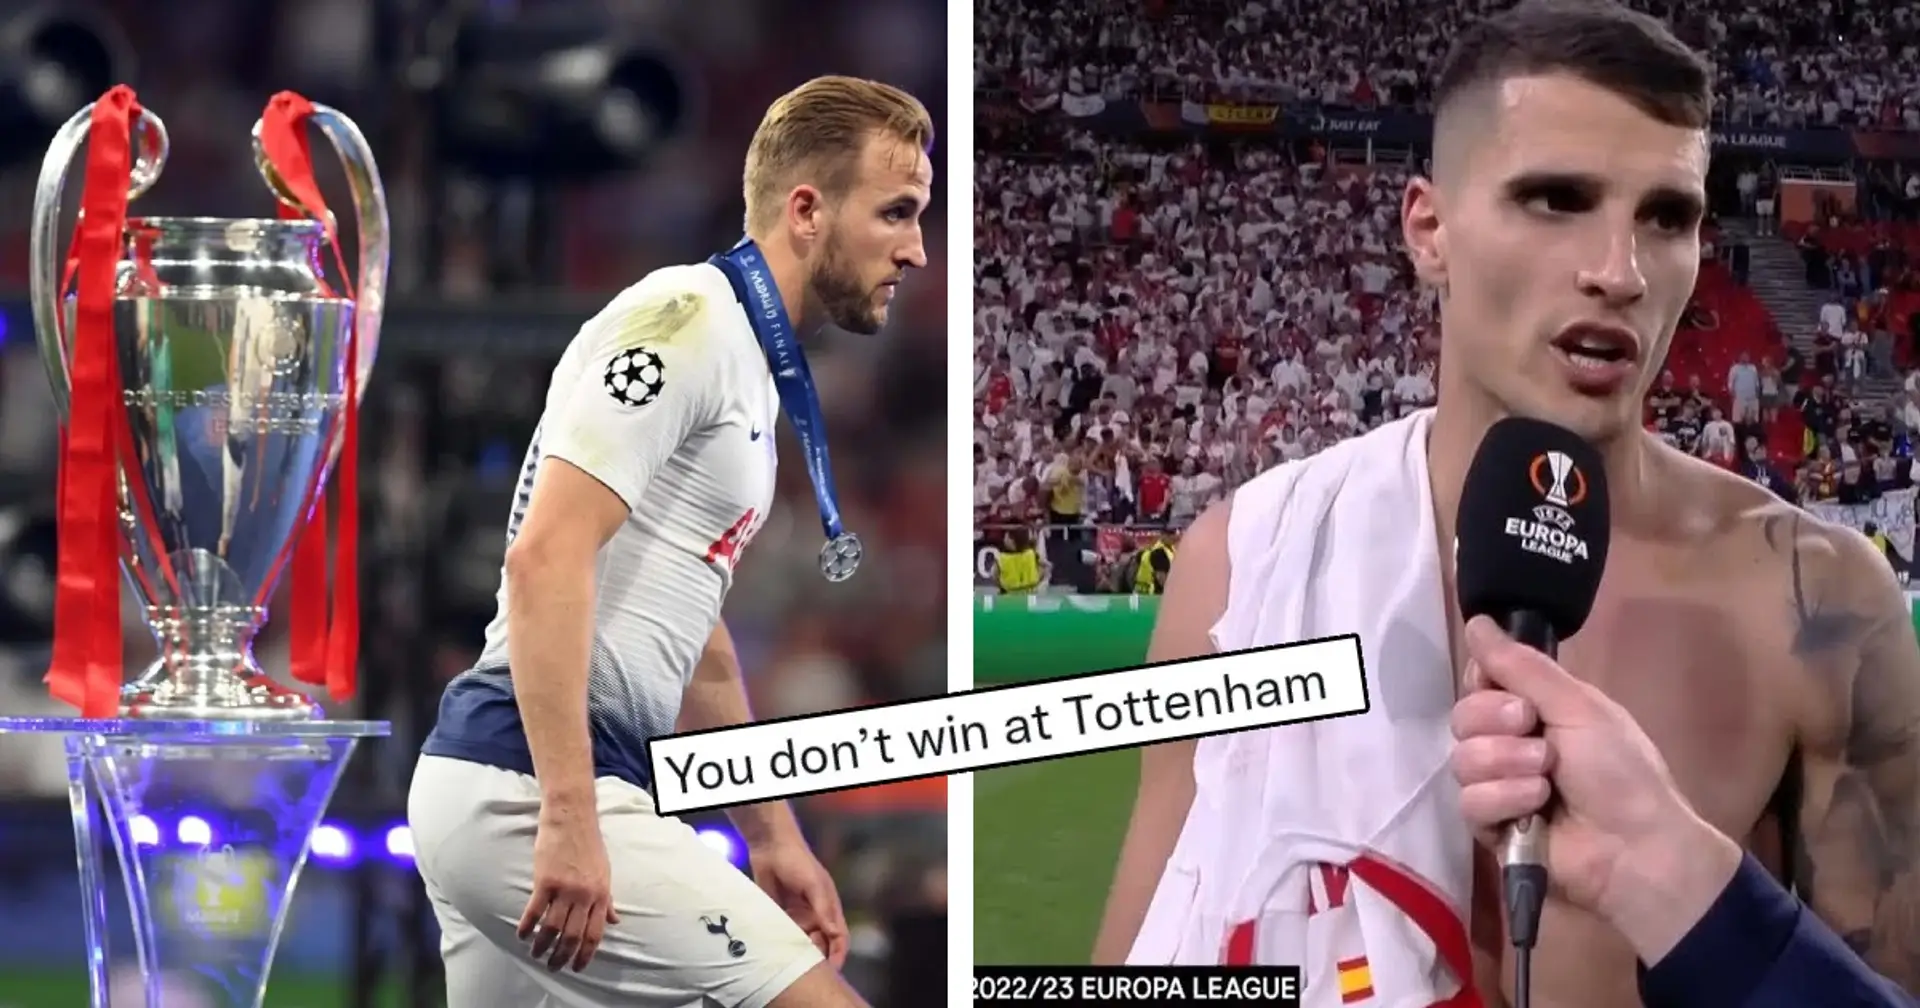 'More trophies than Spurs': Arsenal fans troll rivals after Europa League final 